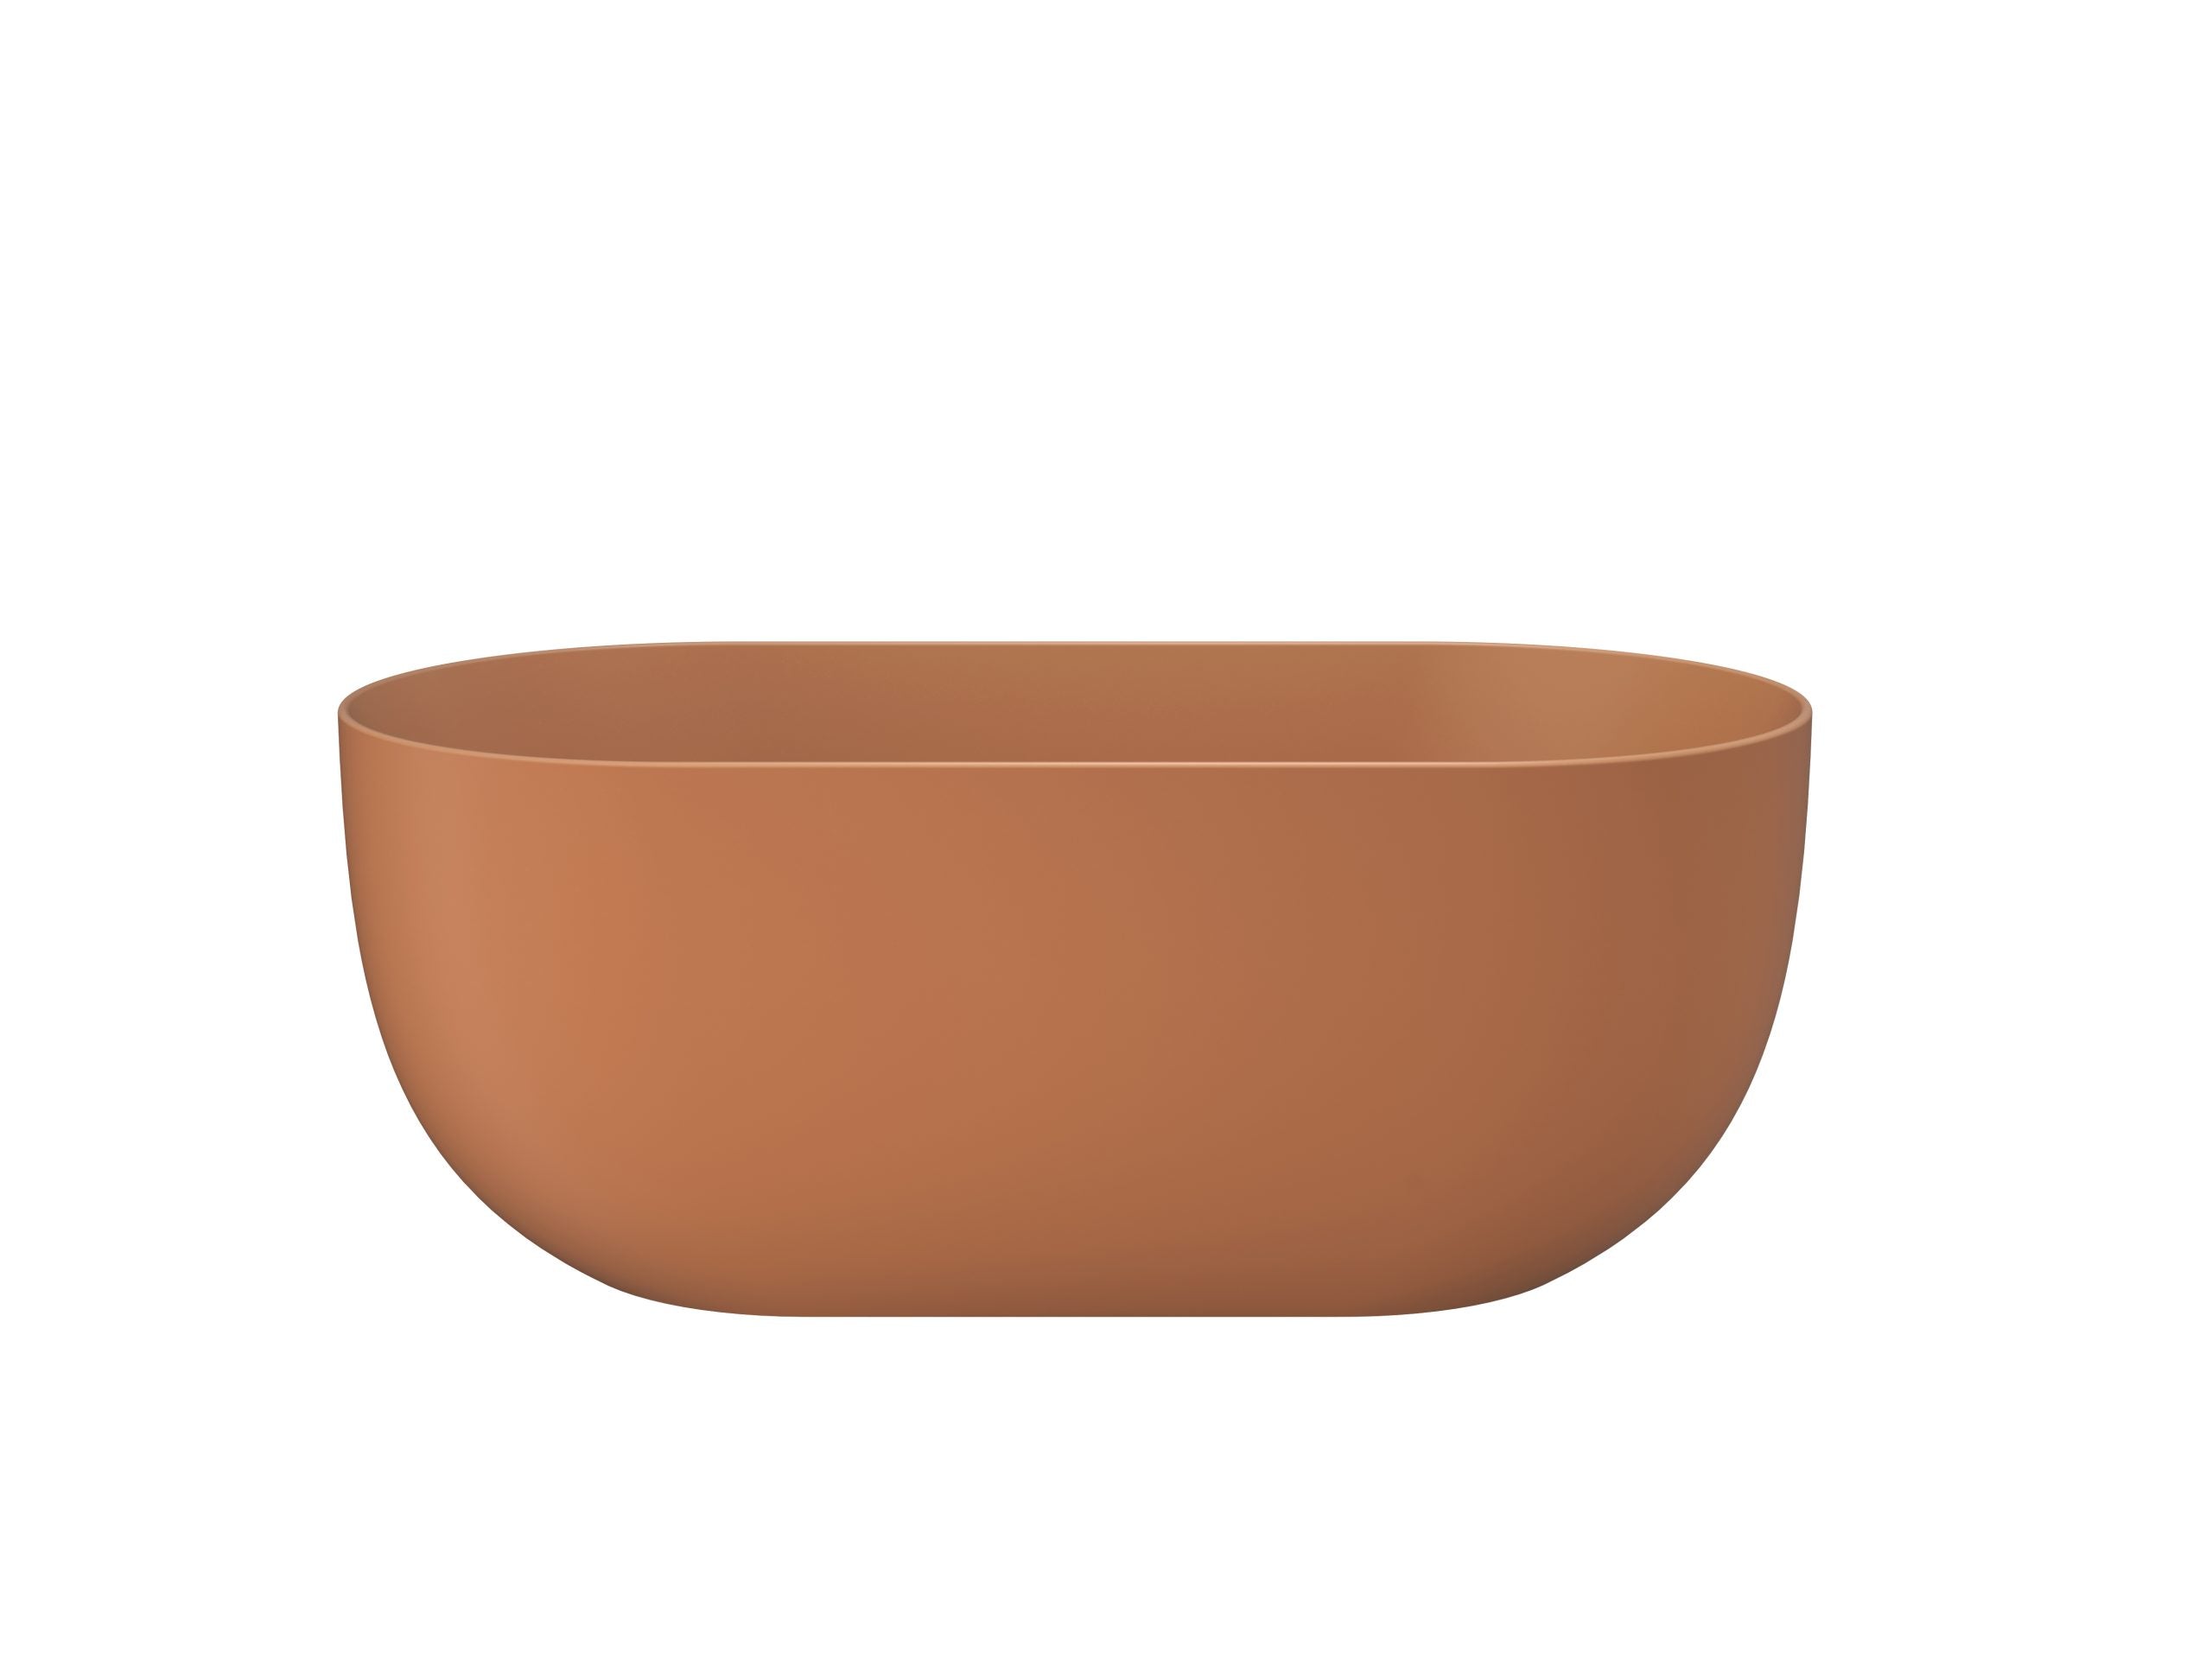 LINSOL NORA FREESTANDING BATHTUB OUTBACK ORANGE (AVAILABLE IN 1500MM AND 1700MM)